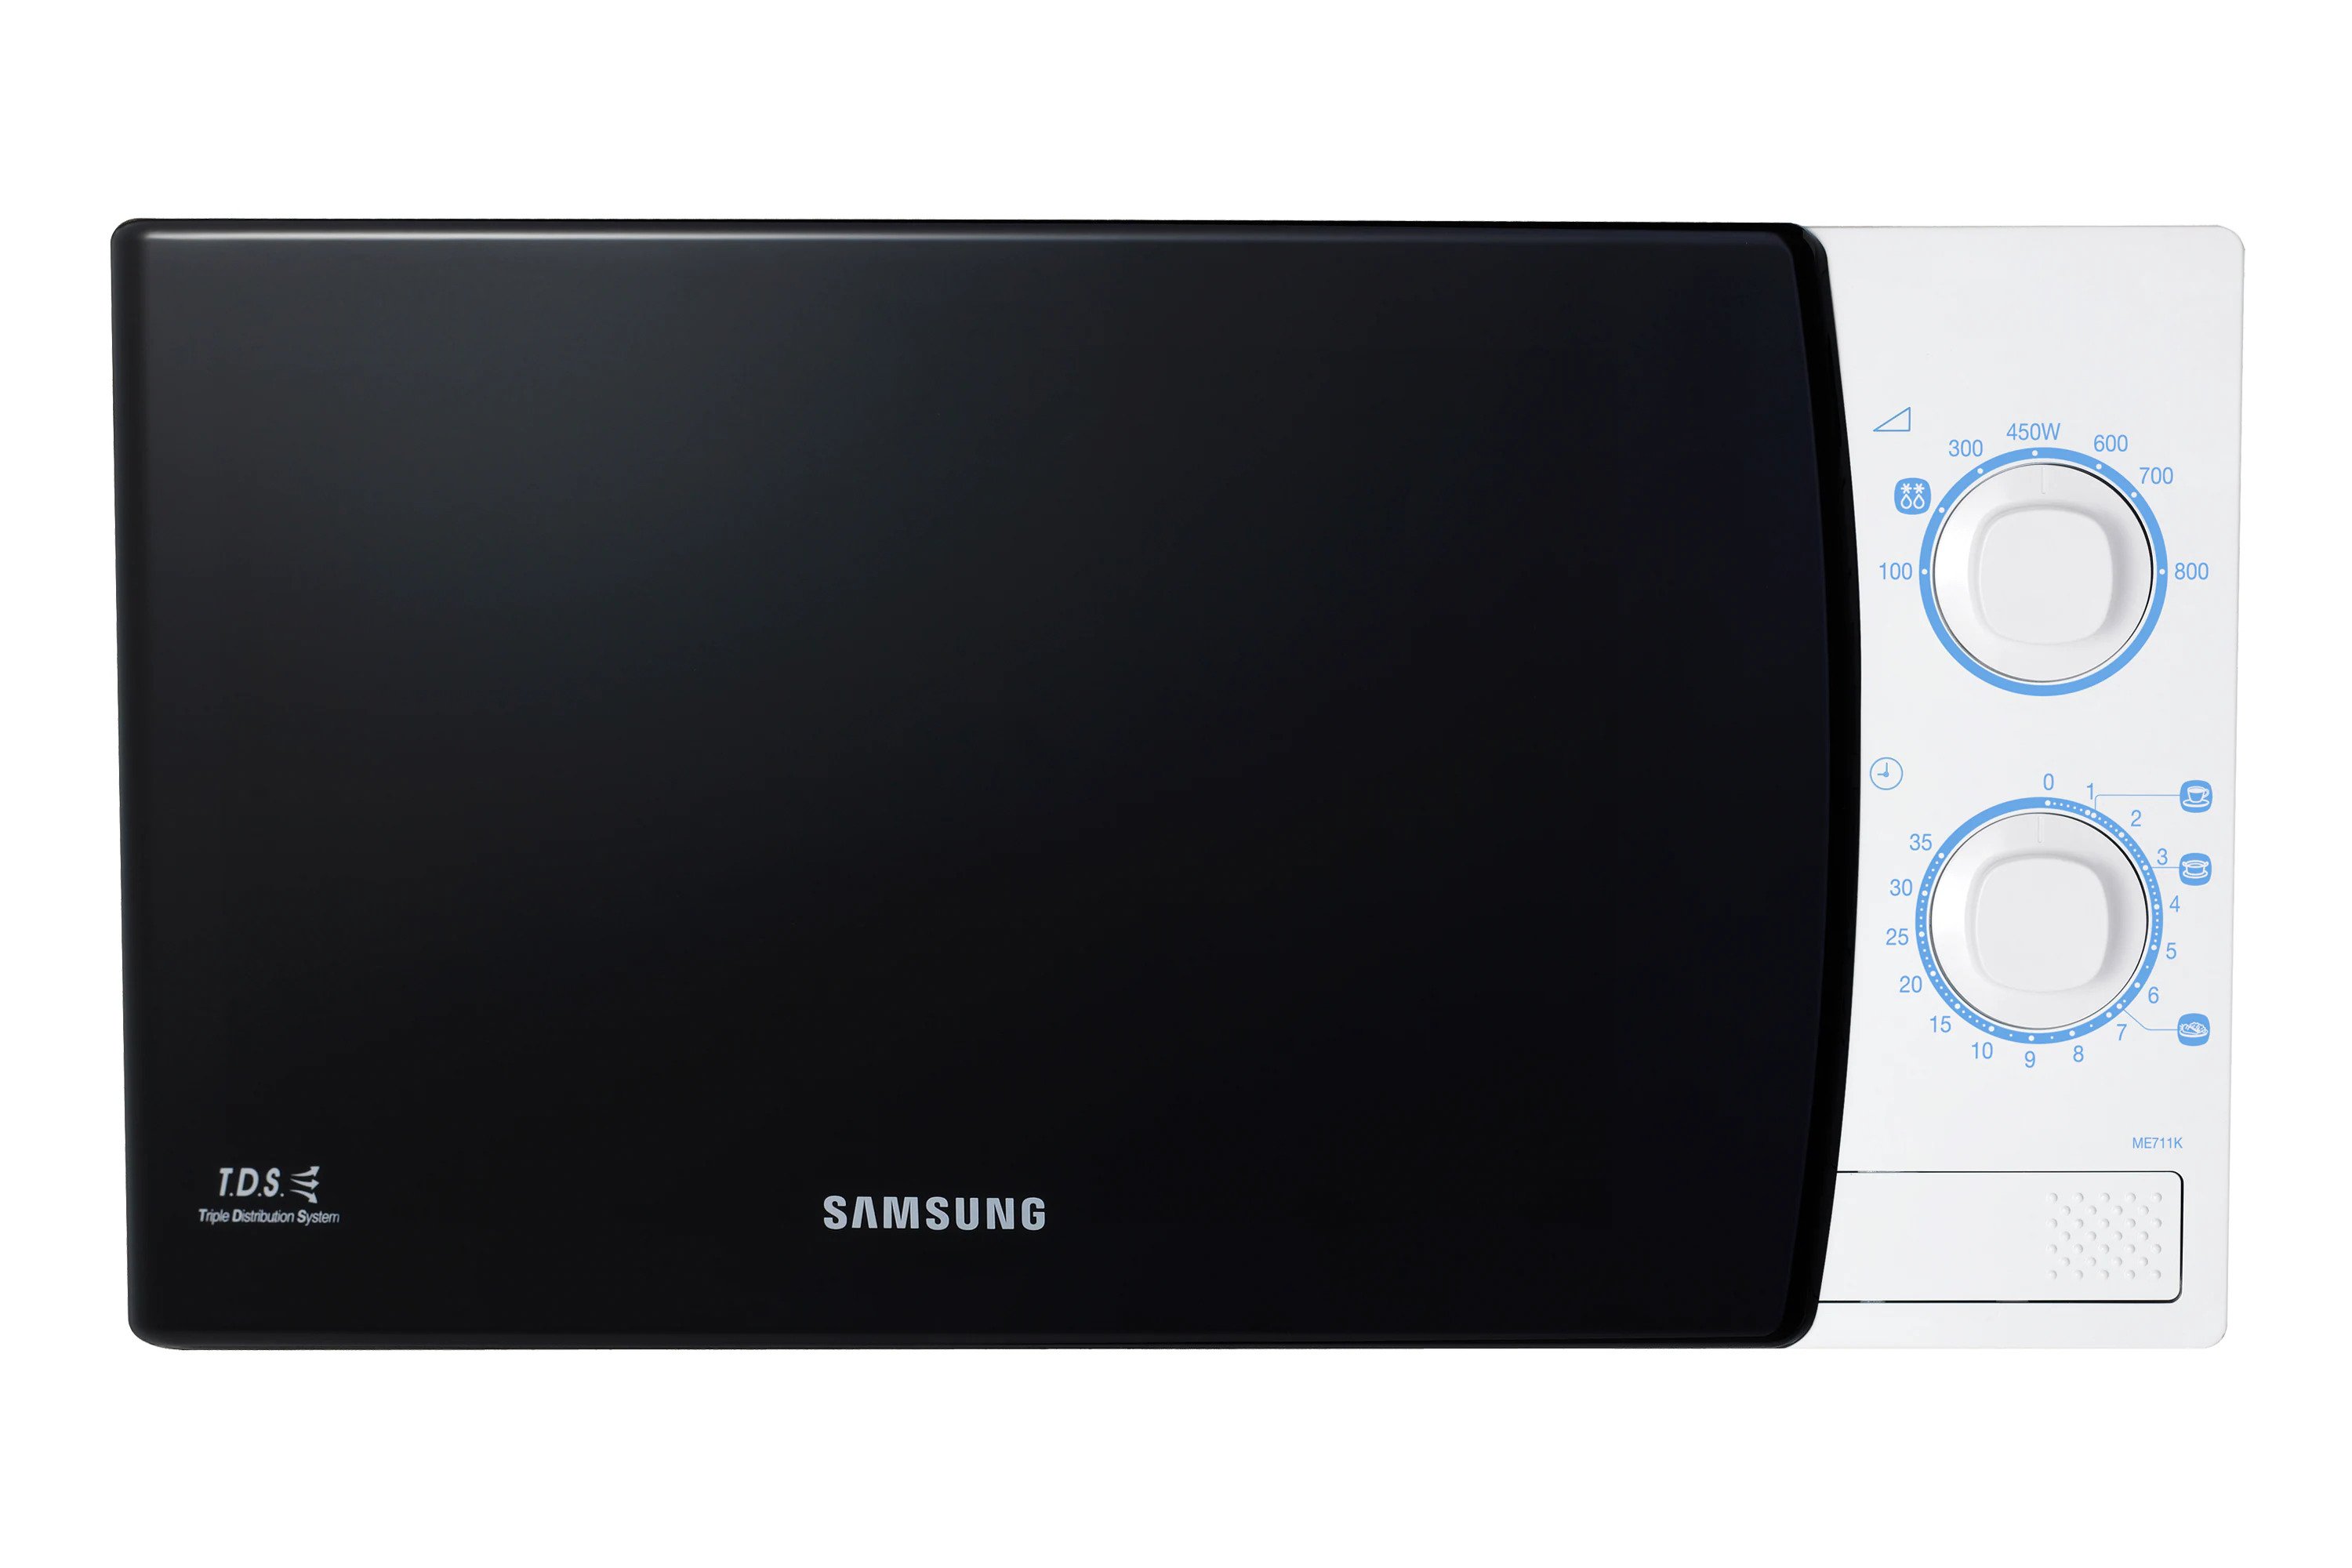 How To Fix The Error Code E-11 For Samsung Microwave